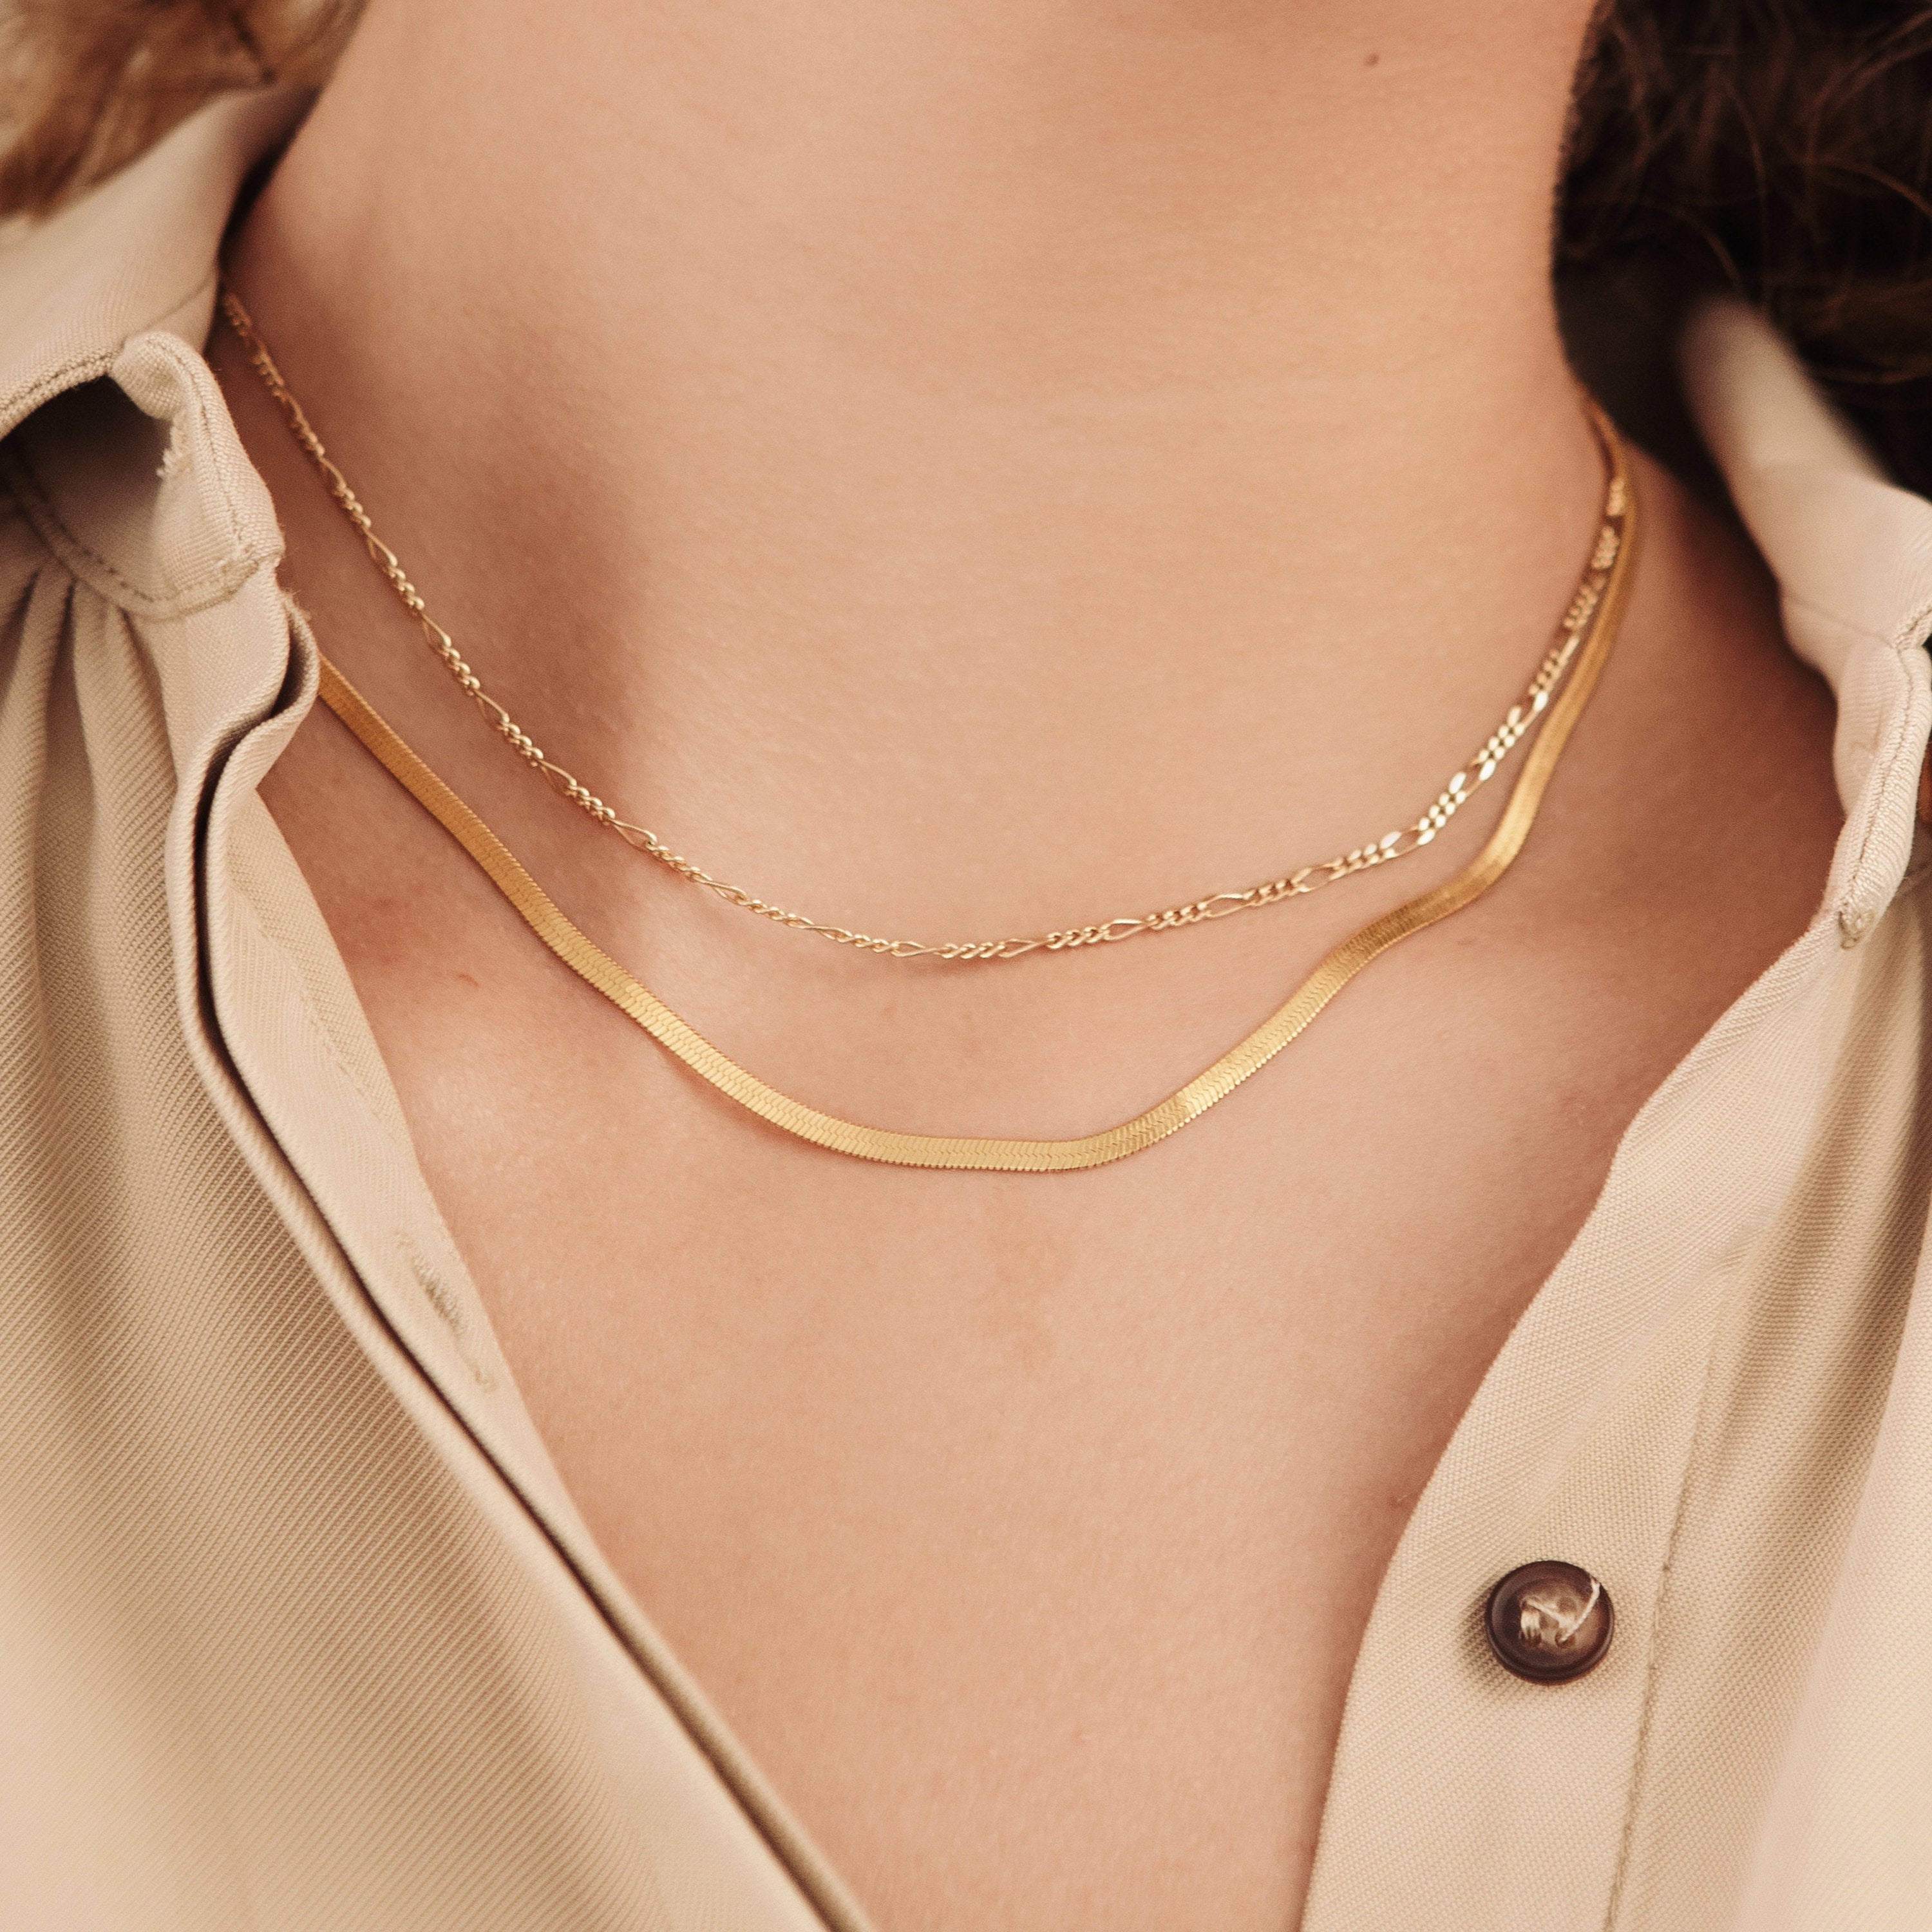 Gold Chain Herringbone Necklace and Bracelet 18K Plated Waterproof Tarnish  Free Stainless Steel Travel Jewelry, Christmas Gift for Her - Etsy